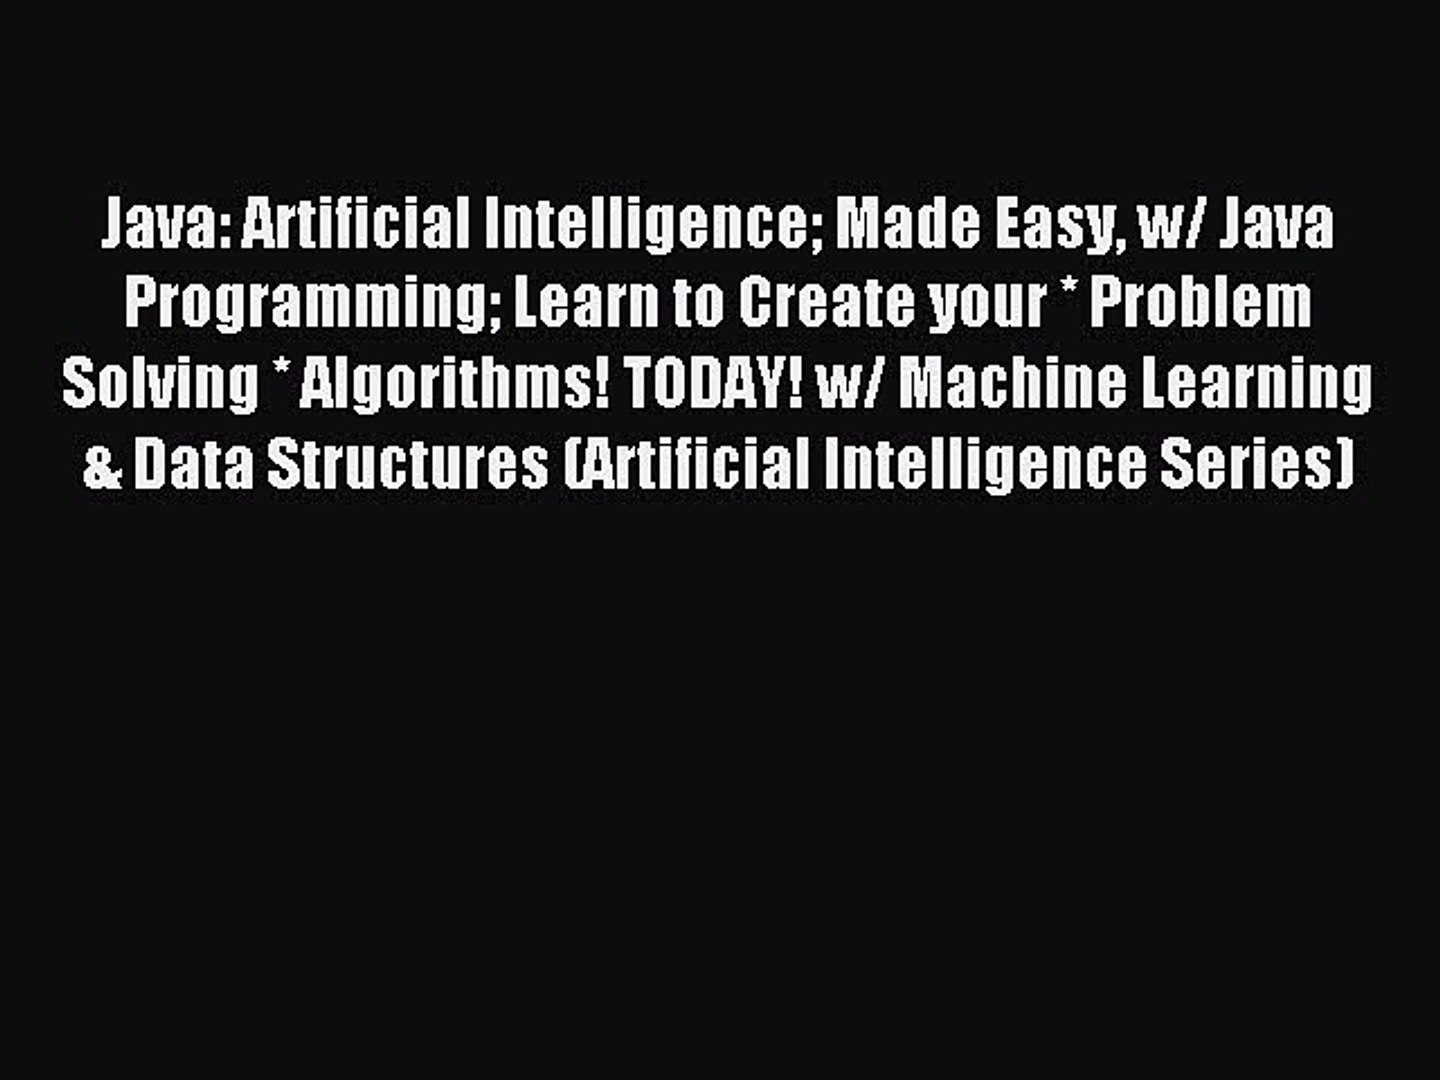 Read Java: Artificial Intelligence Made Easy w/ Java Programming Learn to Create your * Problem